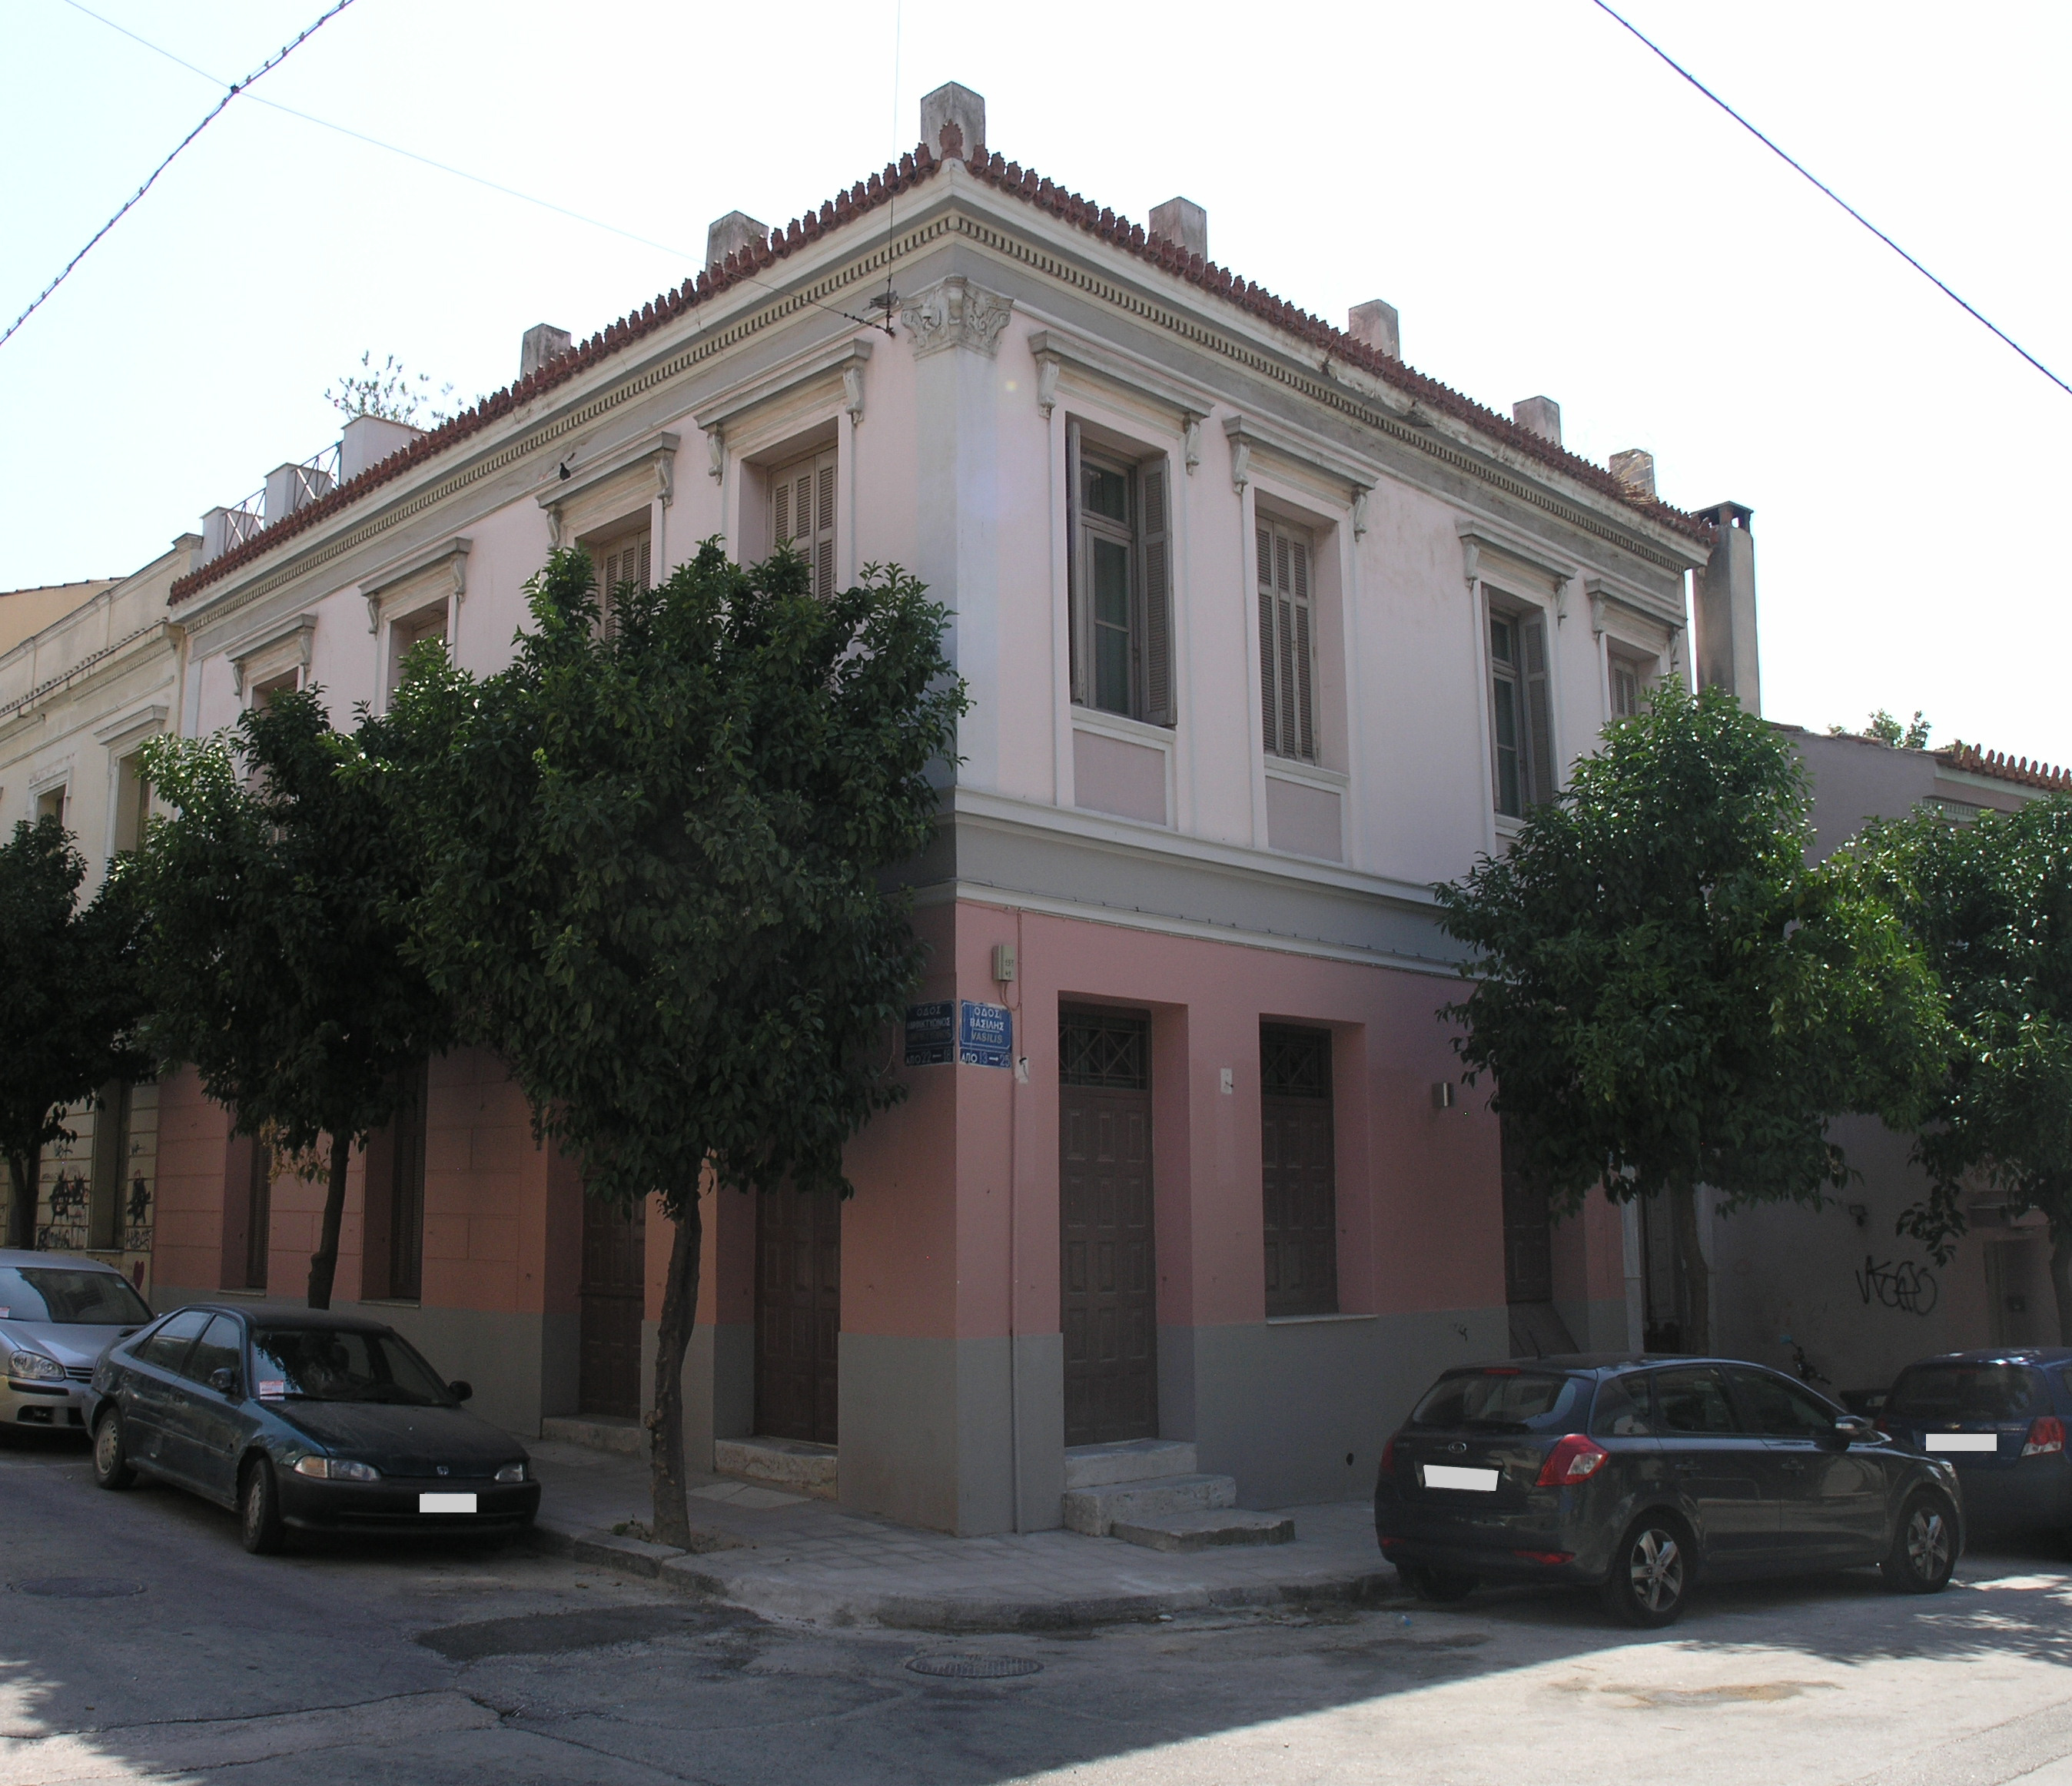 General view of the building (2015)